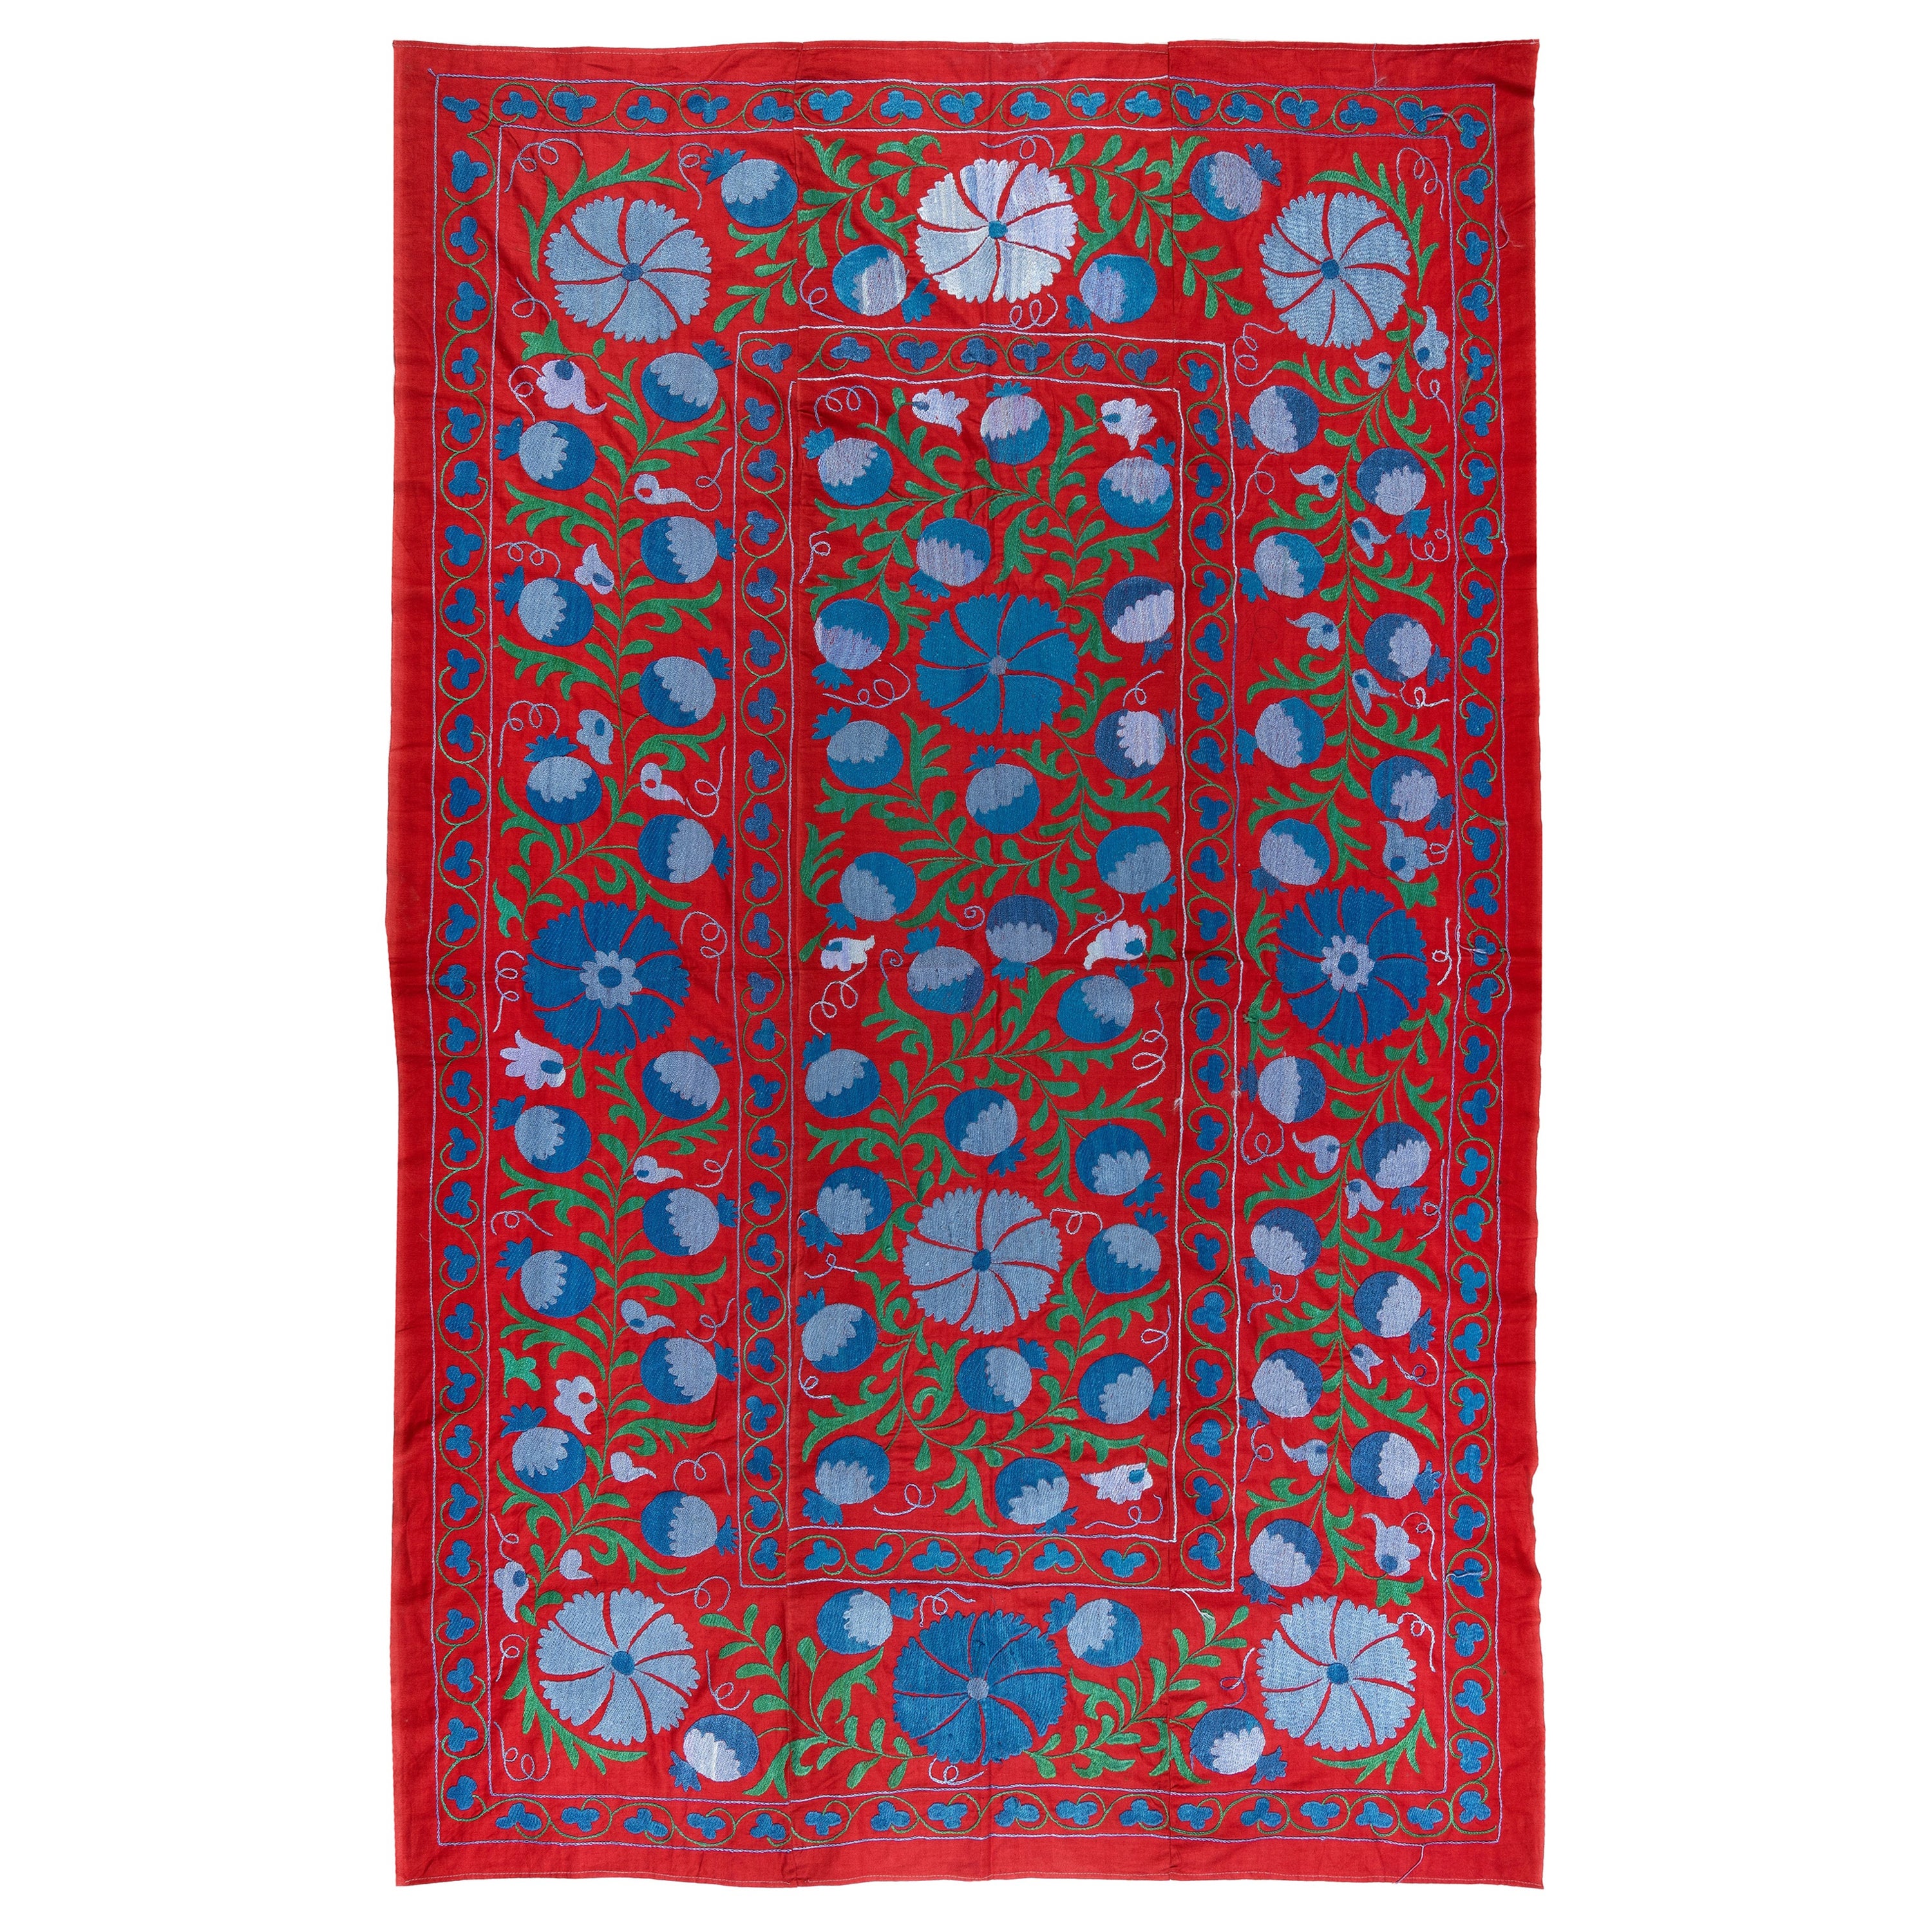 4.5x7 Ft Magnificent Silk Embroidery Suzani Wall Hanging in Red, Blue and Green For Sale